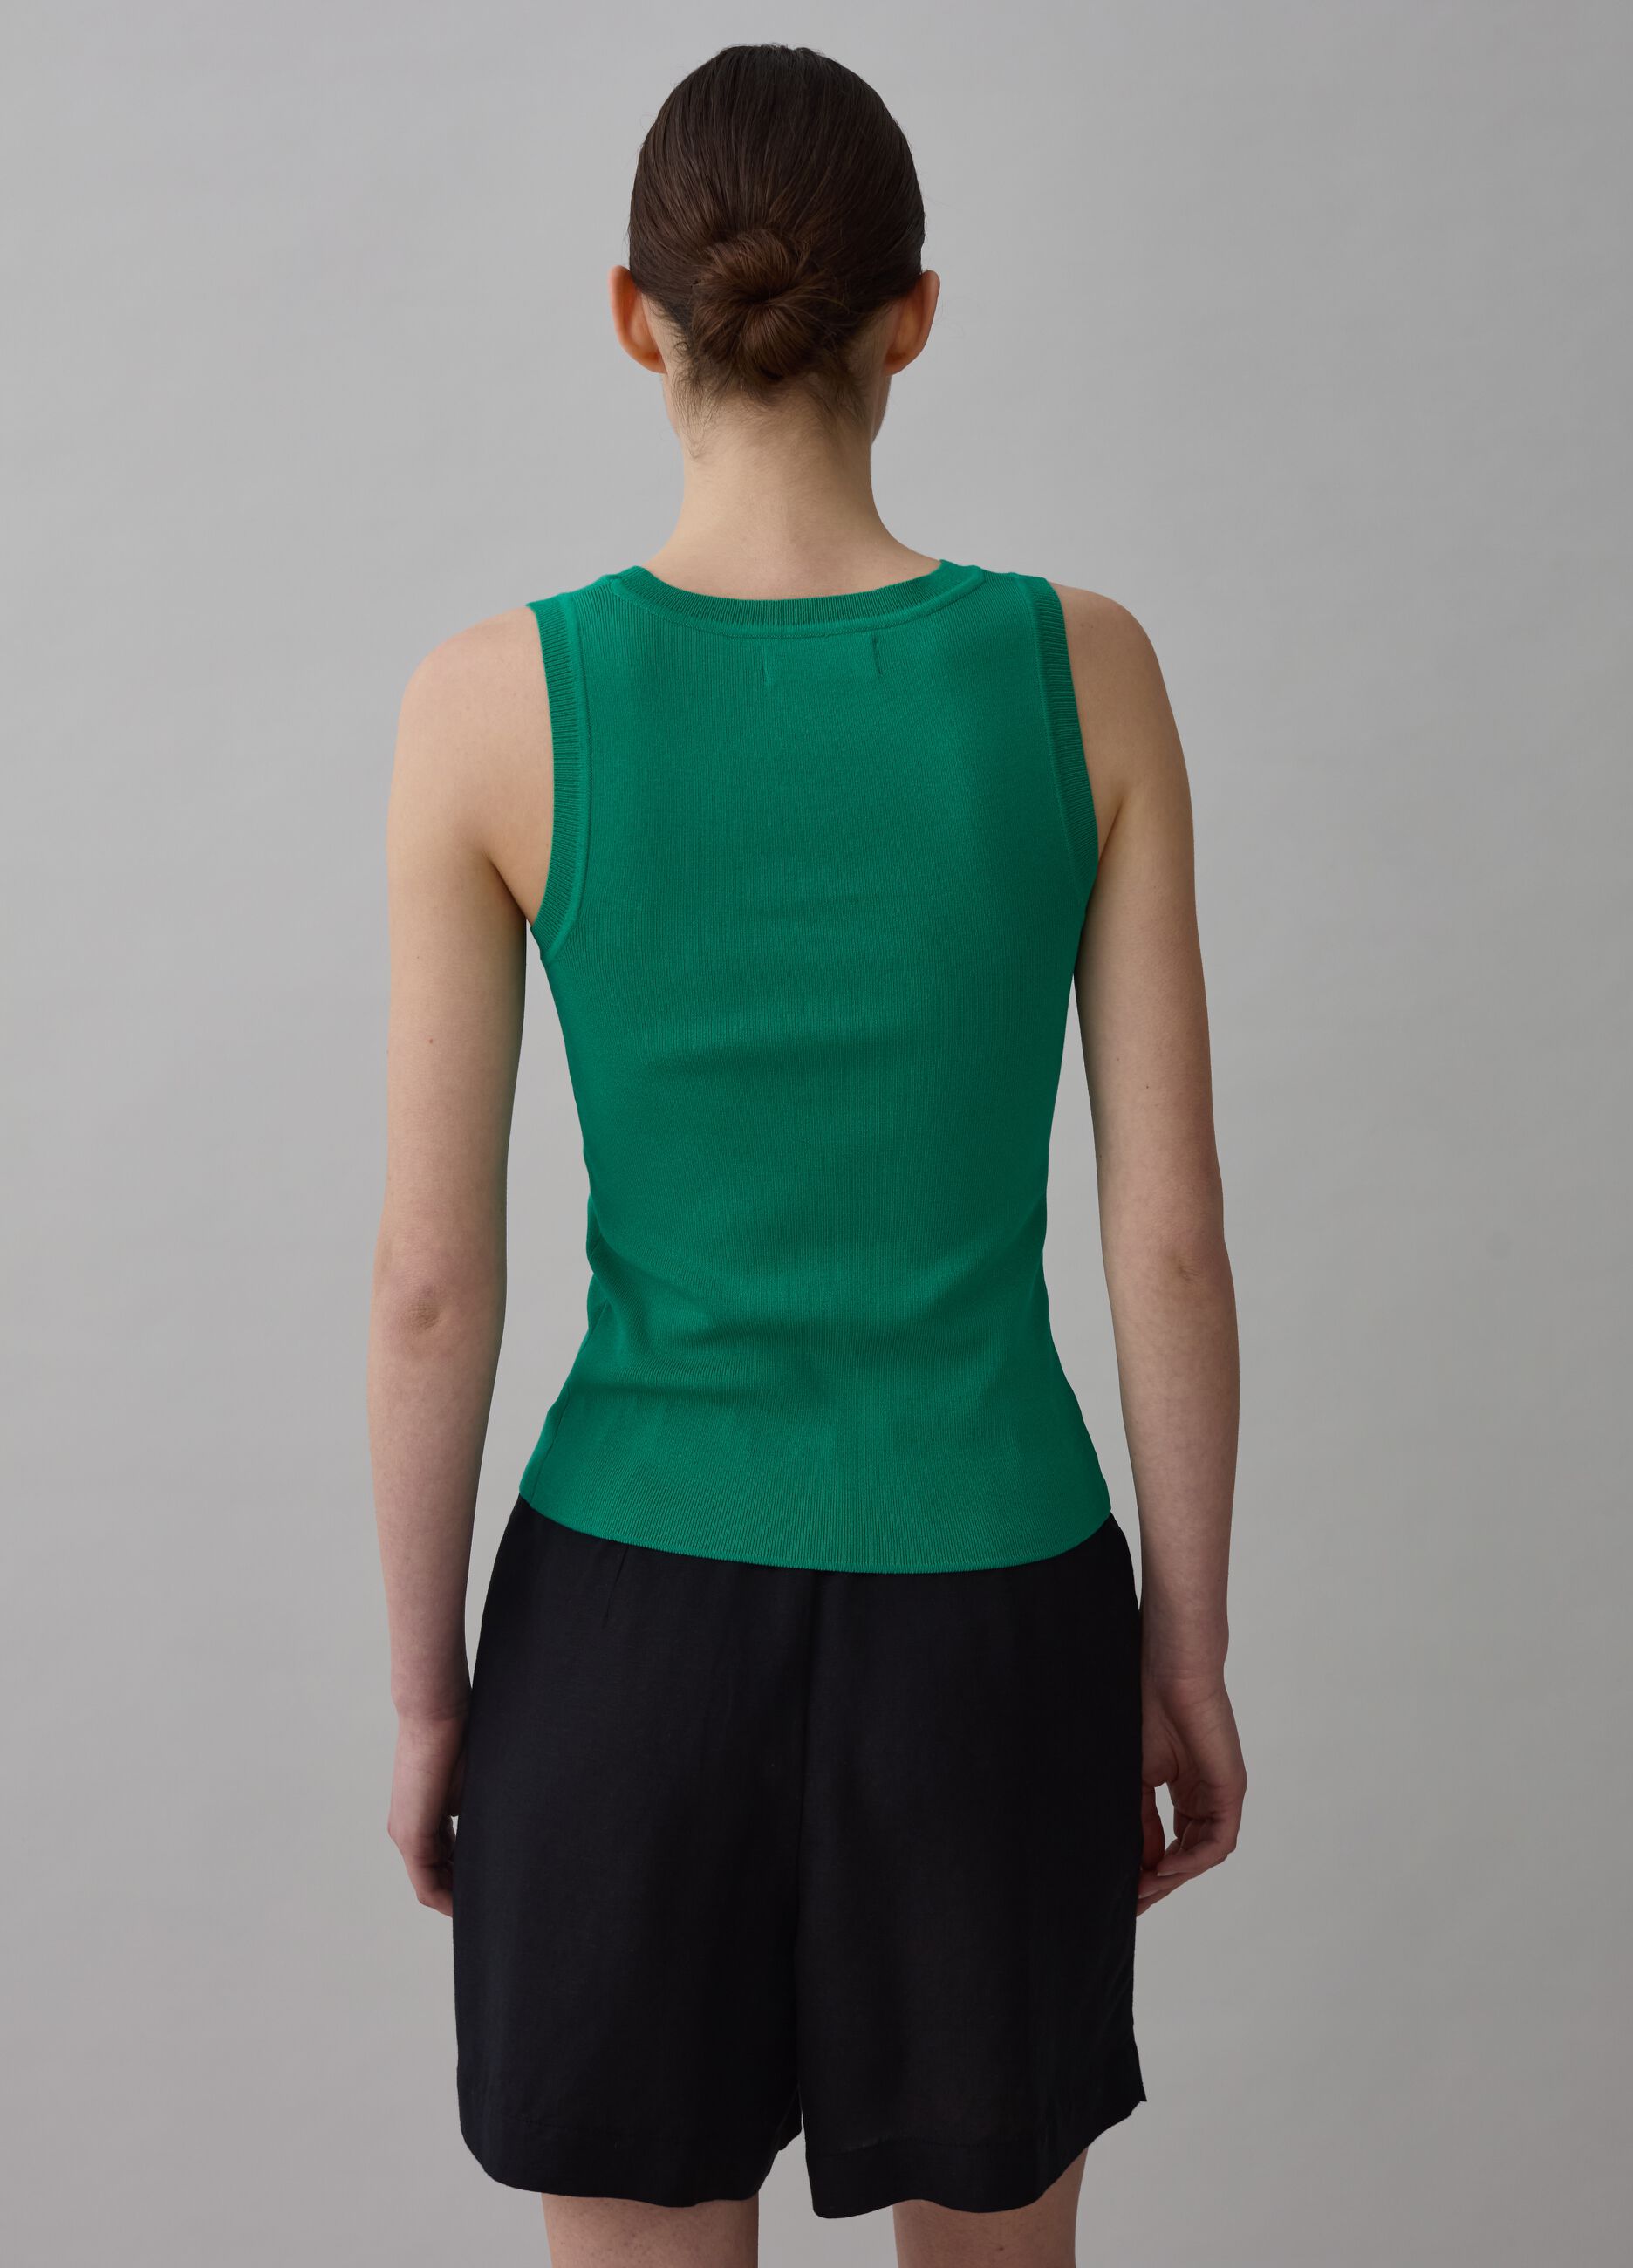 Ribbed tank top with round neckline